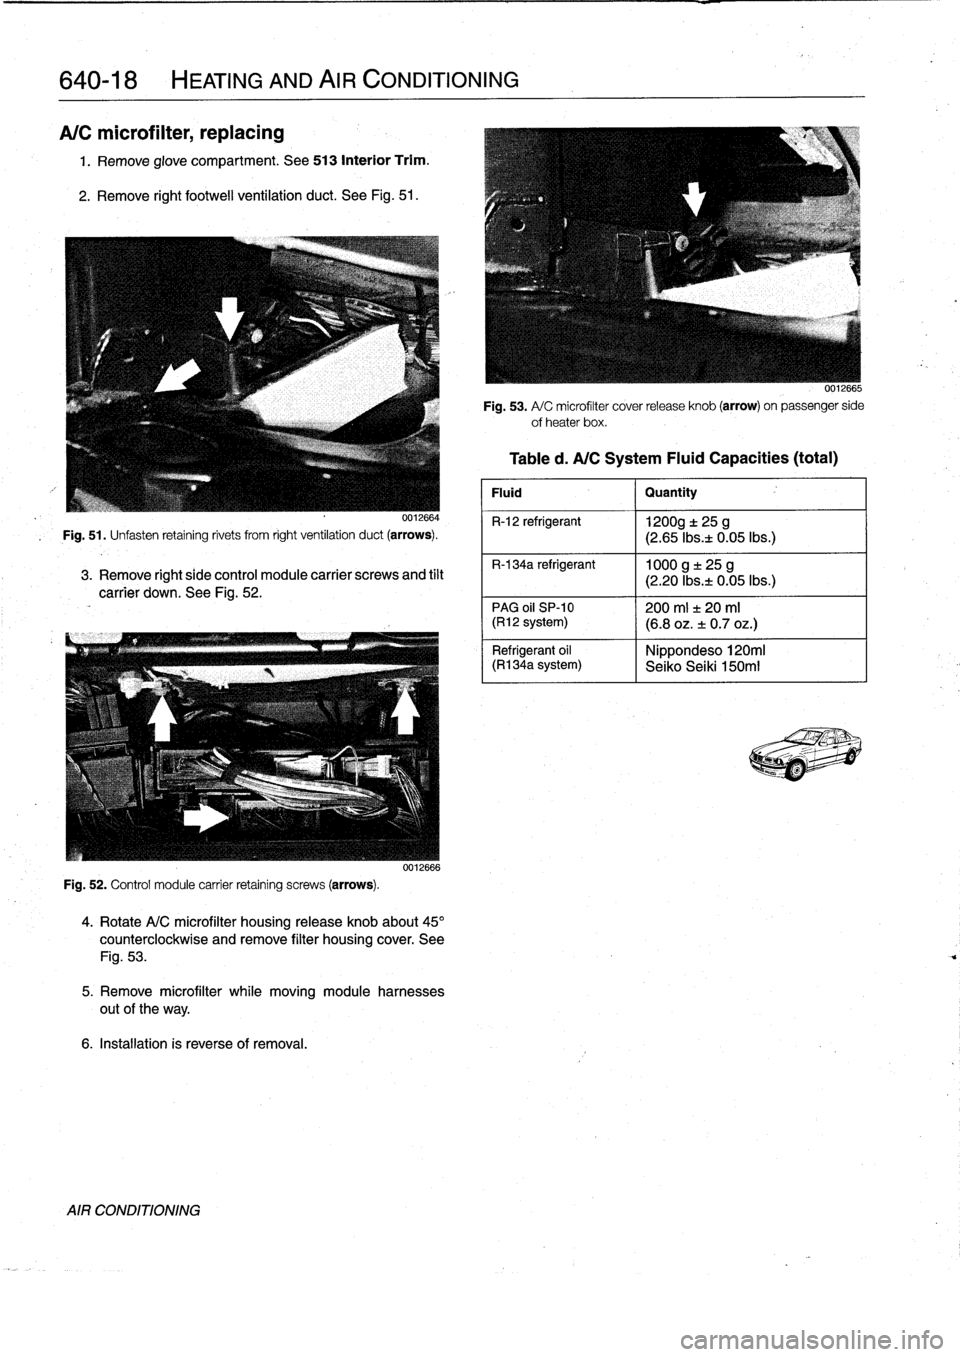 BMW 318i 1997 E36 Owners Guide 
640-18

	

HEATING
AND
AIR
CONDITIONING

A/C
microfilter,
replacing

1
.
Remove
glove
compartment
.
See
513
Interior
Trim
.

2
.
Remove
right
footwell
ventilation
duct
.
See
Fig
.
51
.

0012664

Fig
